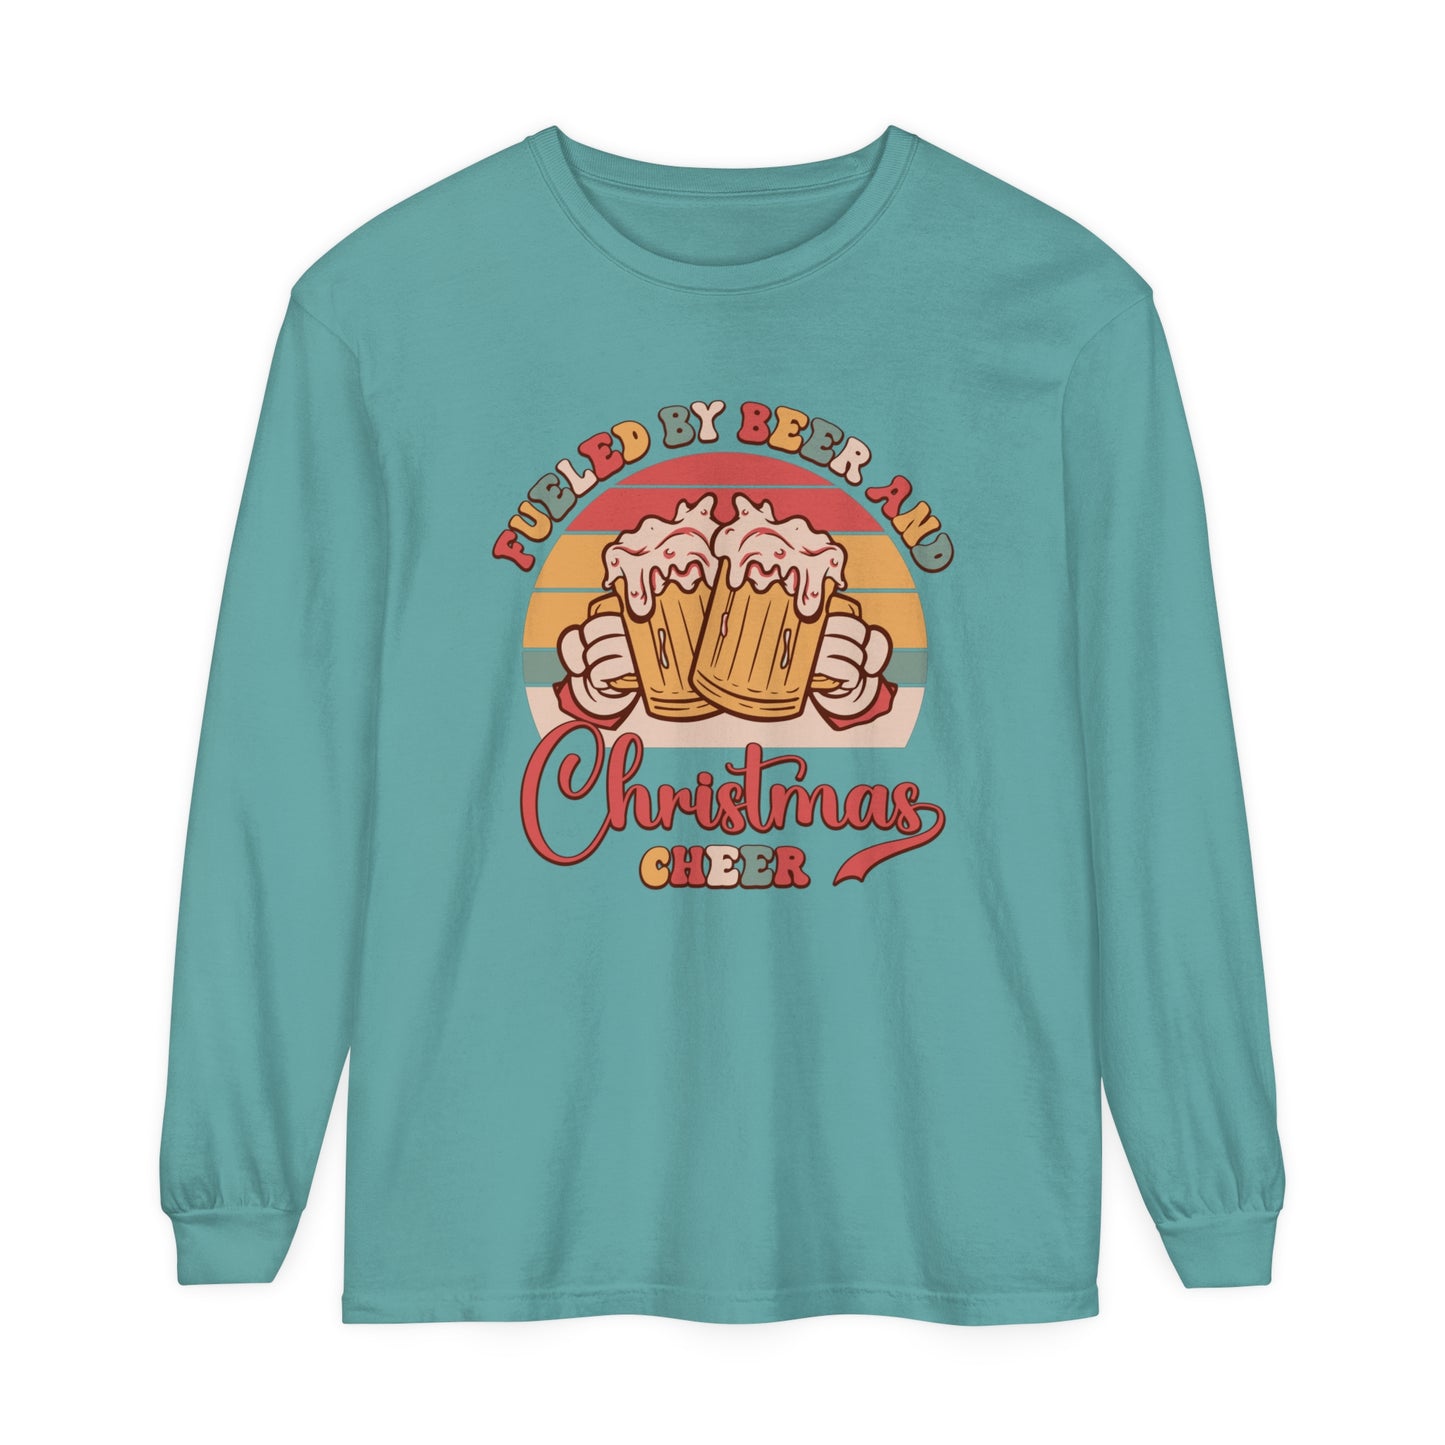 Fueled by beer and Christmas cheer Funny Drinking Holiday Adult Unisex Loose Long Sleeve T-Shirt